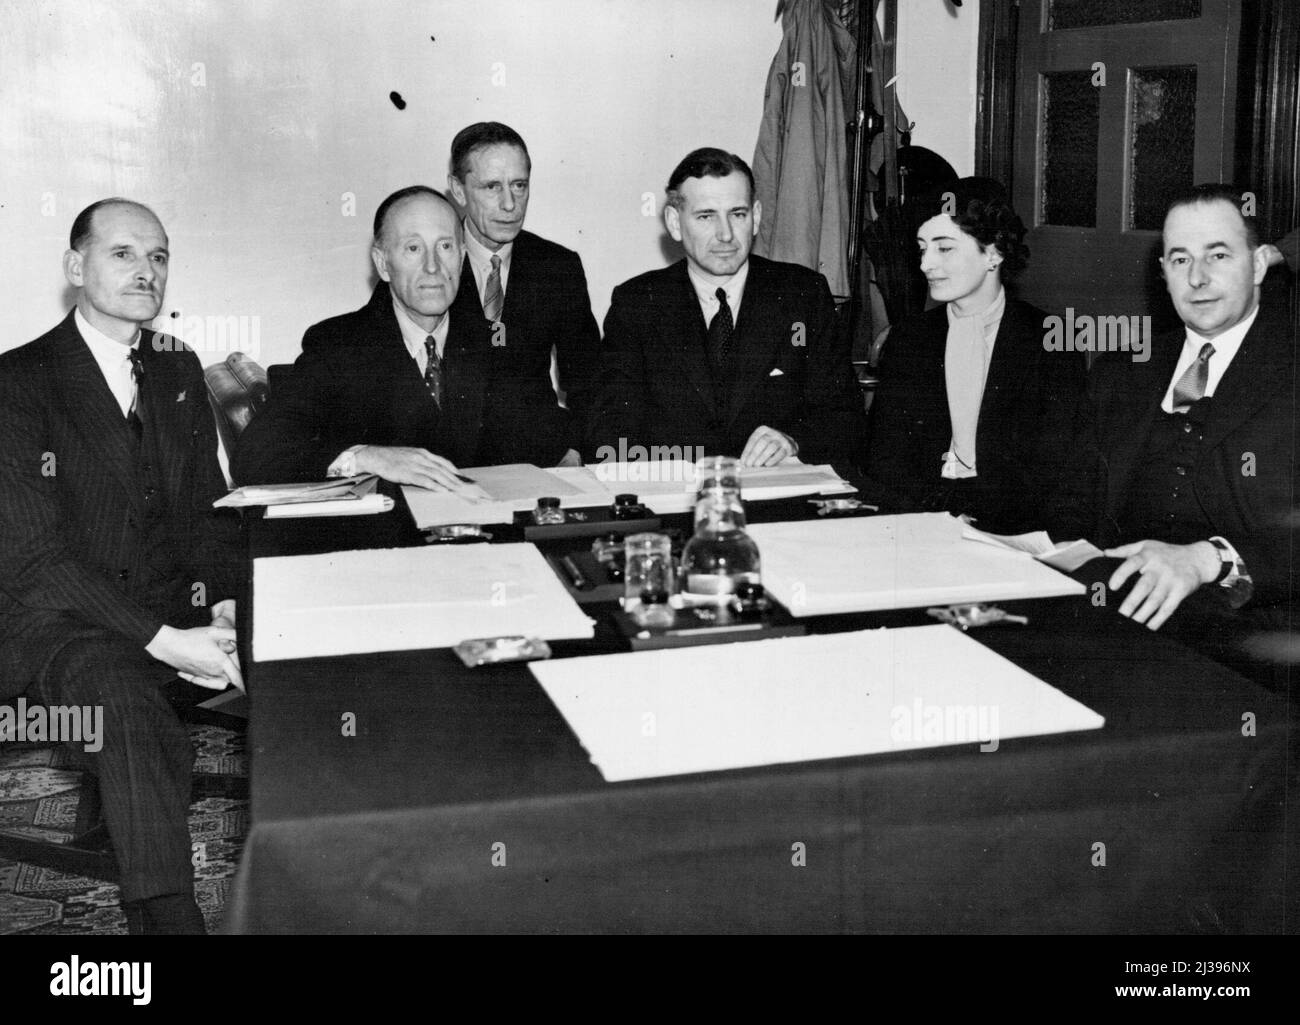 Civil Air Guard -- The firsts meeting of the newly appointed commissioners of the civila air guard at Ariel House, Kingsway W.C. 2. Capt. H.H. Balfour under secretary for state for Air was present. Sitting down in conference. ((L-R) R. Murray, Lord Londonderrry (Chief Commissioner) Air Commodore J.A. Chamier (Organising Secretary) Capt. Balfour, Mrs. F.G. Miles and Maj. Alan Goodfellow. August 29, 1938. (Photo by Sports & General Press Agency Limited). Stock Photo